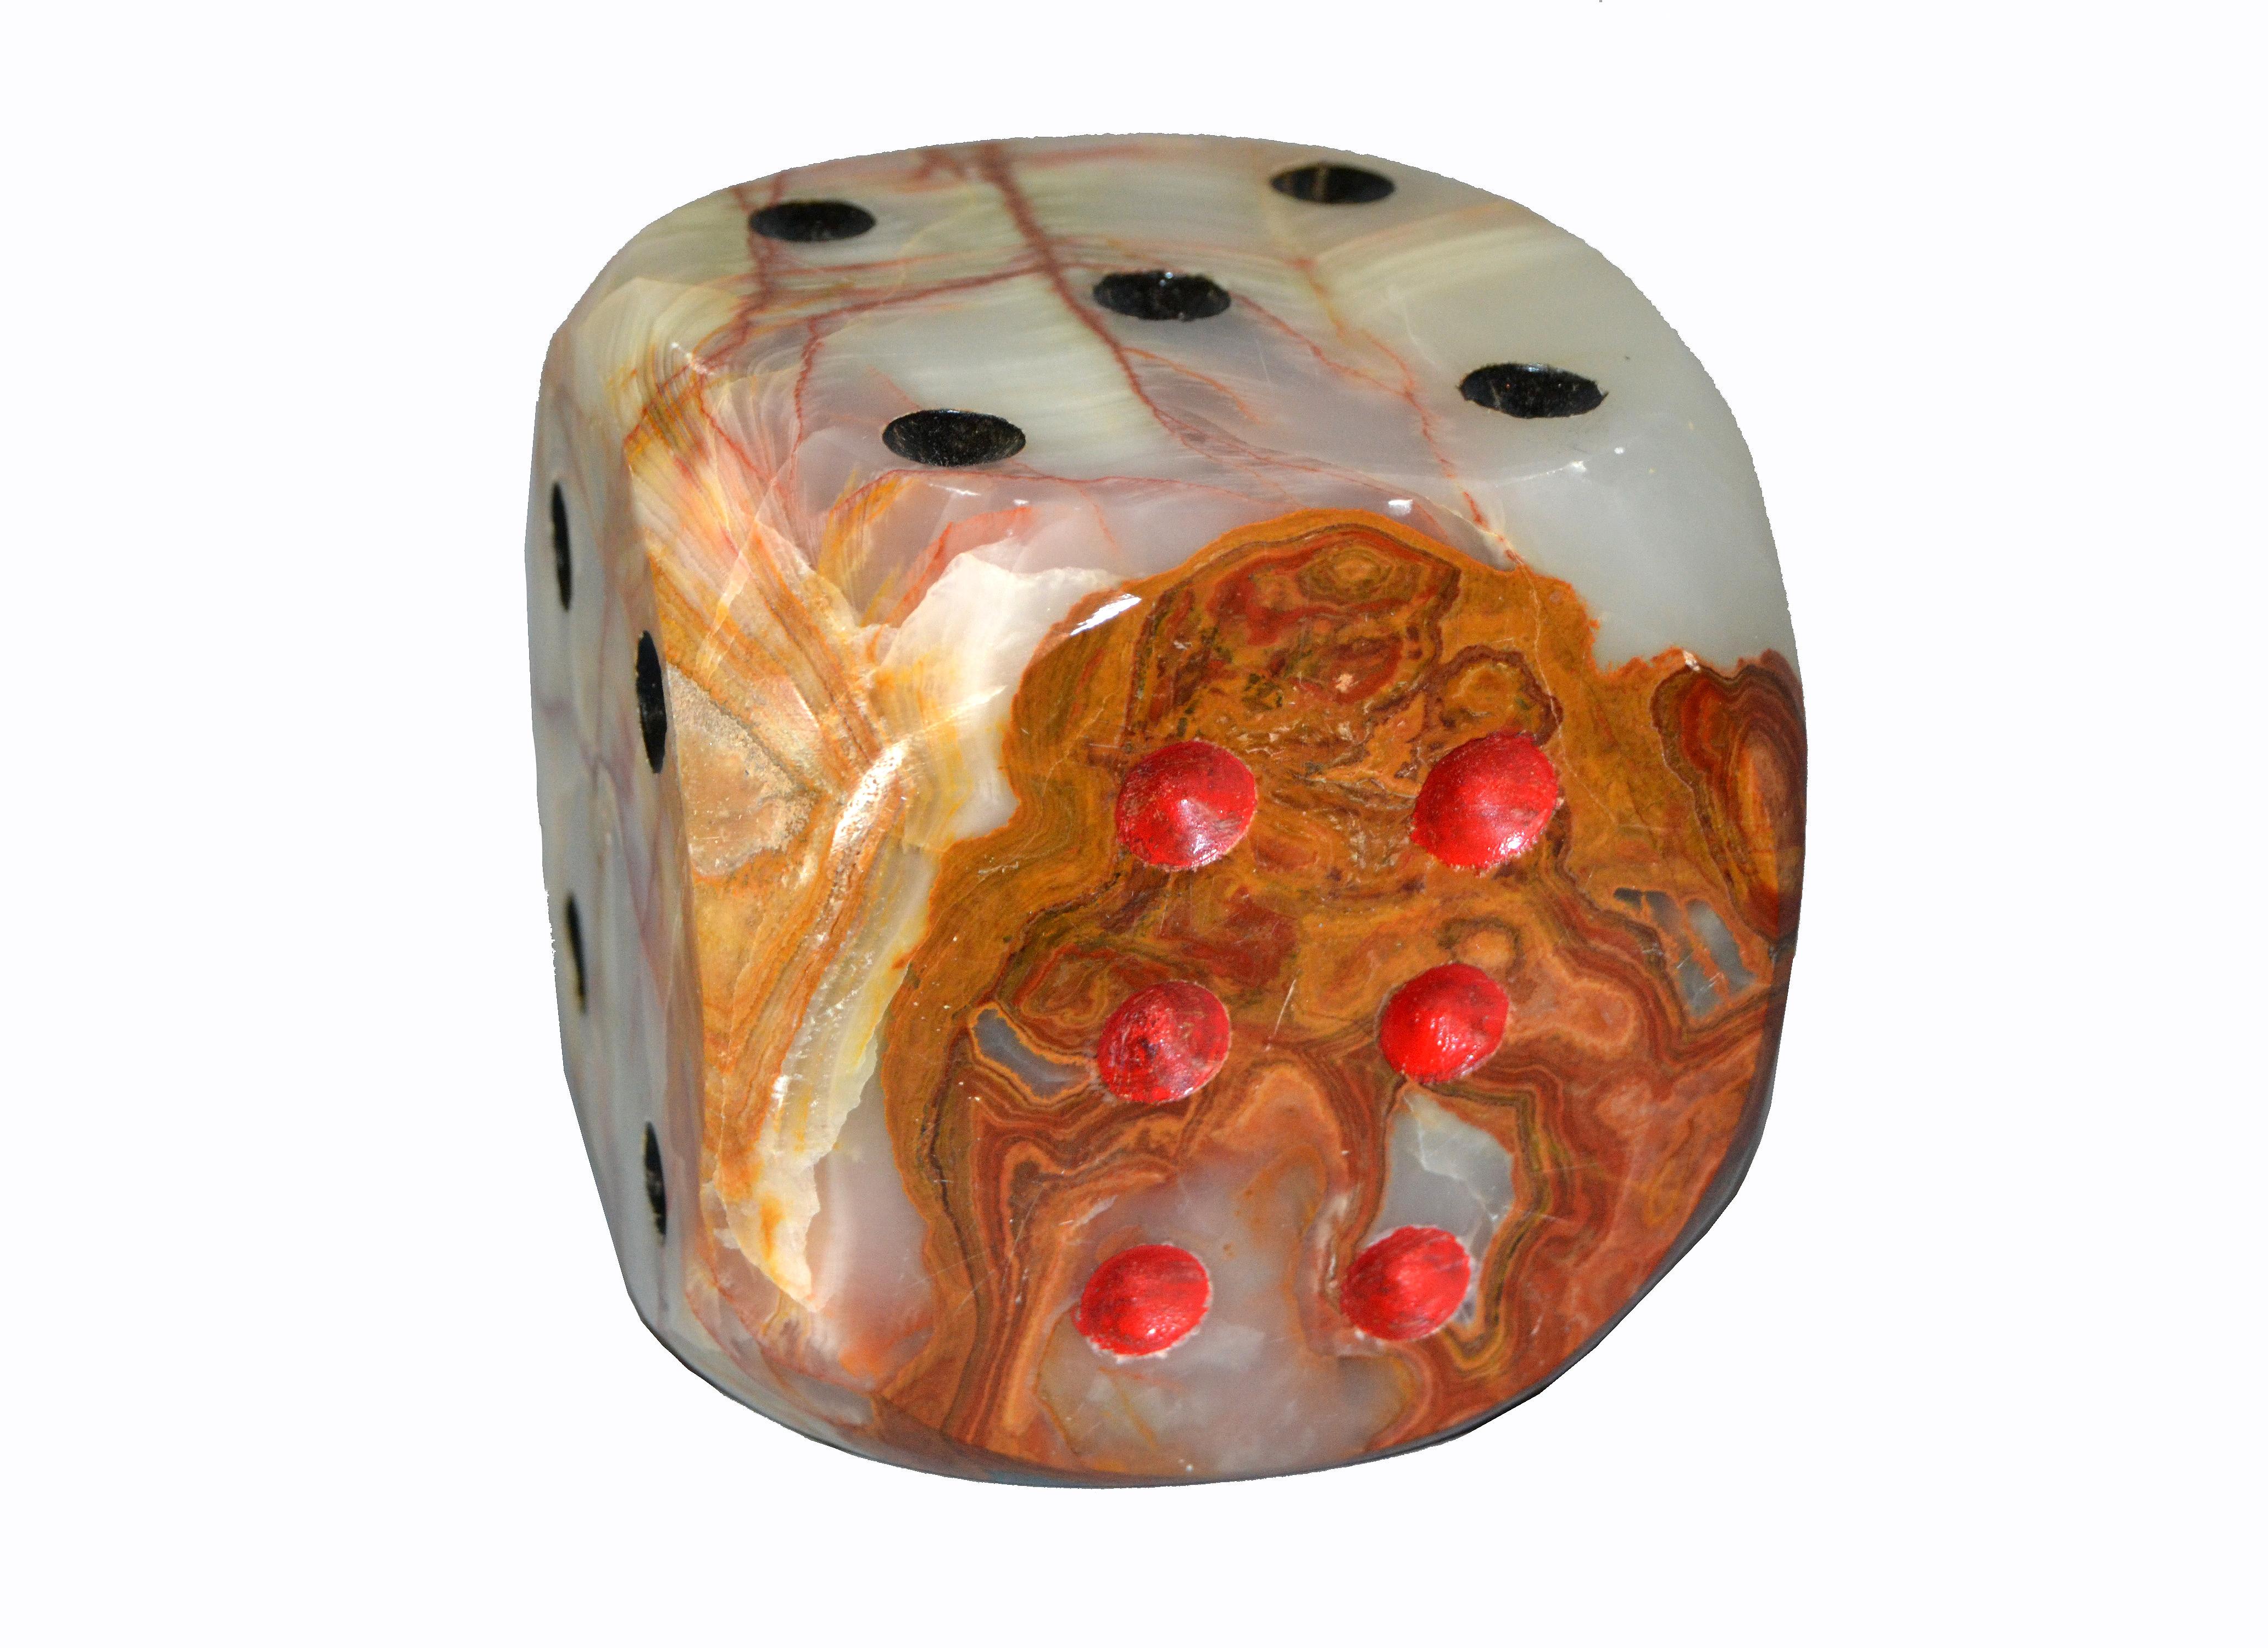 Set of 3 Oversized Mid-Century Modern Handcrafted Marble & Onyx Dice Sculptures For Sale 2